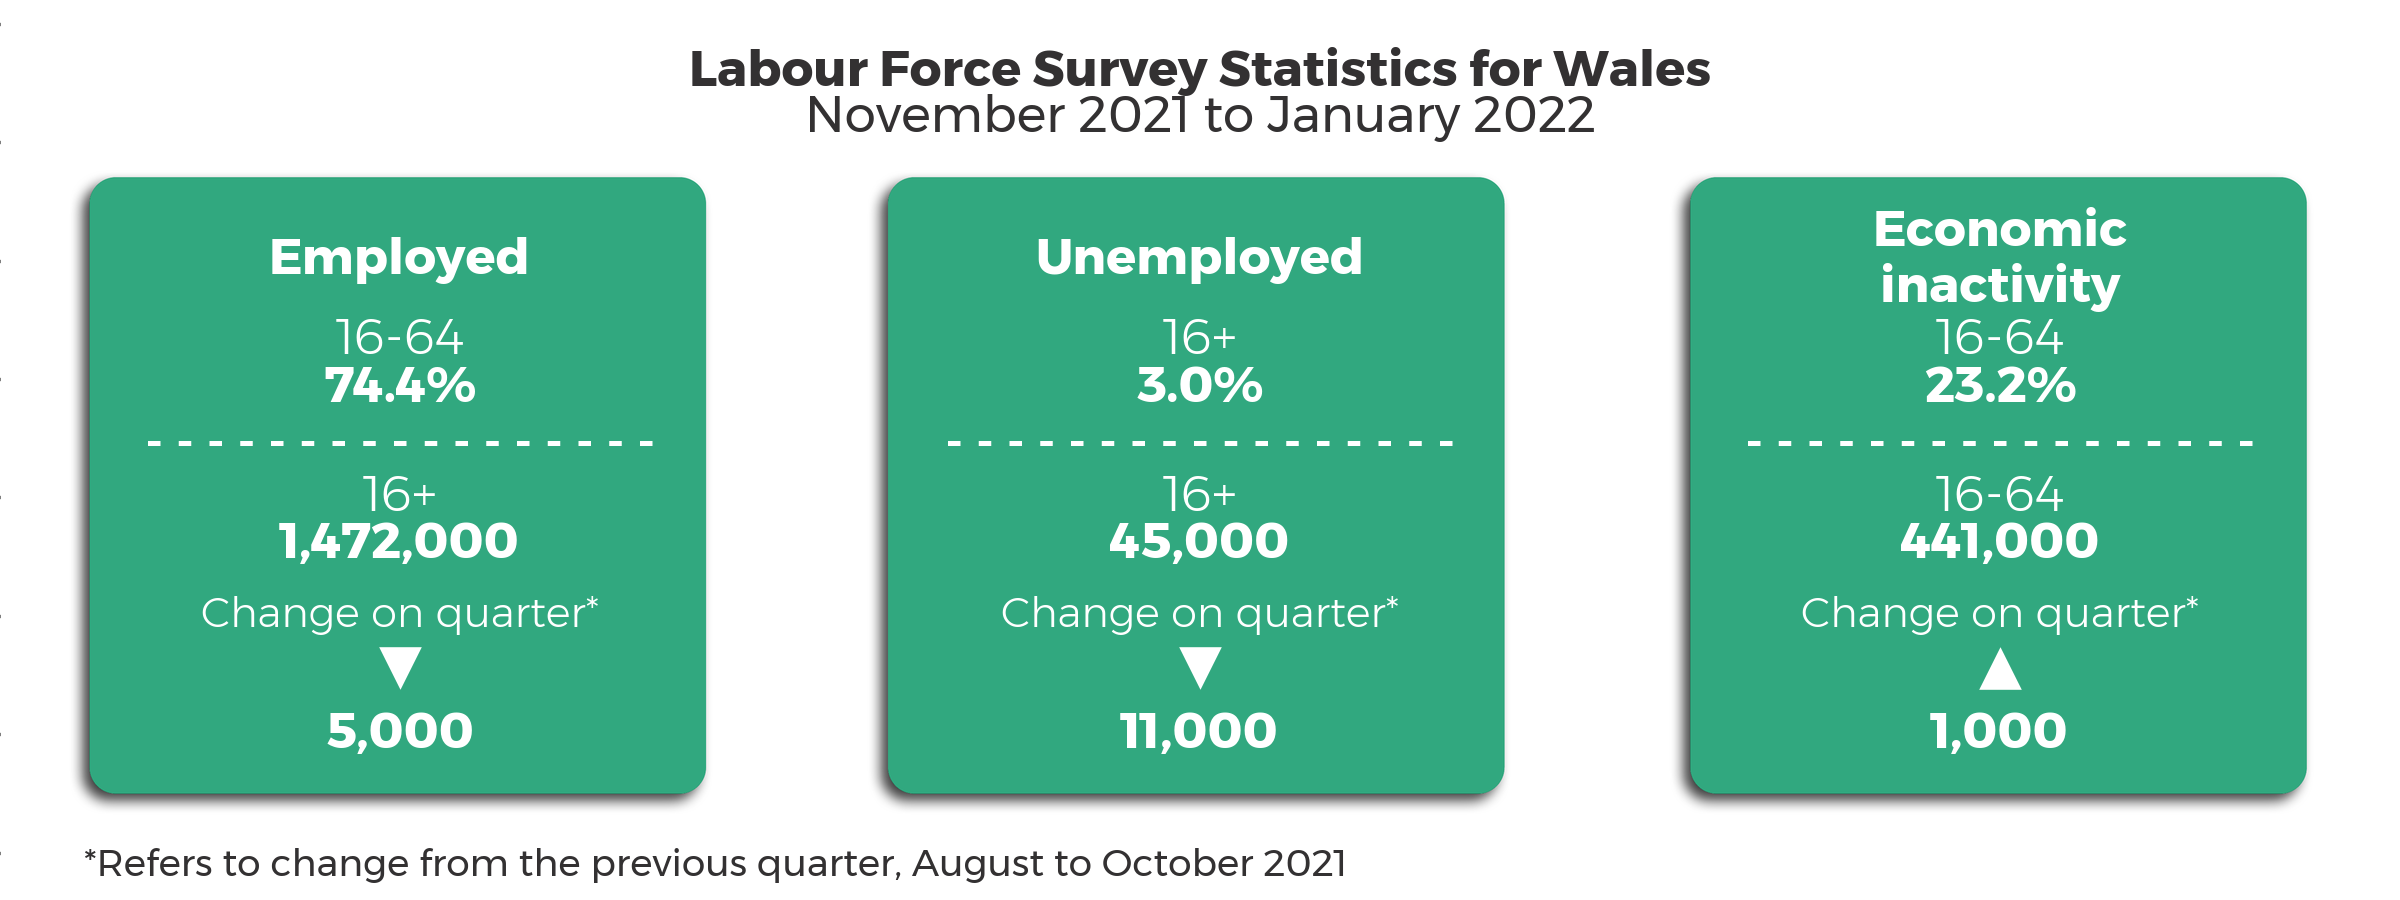 Headline statistics November 2021 to January 2022 compared to the previous quarter August 2021 to October 2021. The 16+ unemployment rate is 3.0% with 45,000 people unemployed, a decrease of 11,000 from the previous quarter. The 16-64 employment rate is 74.4%. 1,472,000 people aged 16+ employed, a decrease of 5,000 from the previous quarter. The 16-64 economic inactivity rate is 23.2% with 441,000 people economically inactive, an increase of 1,000 on the previous quarter.